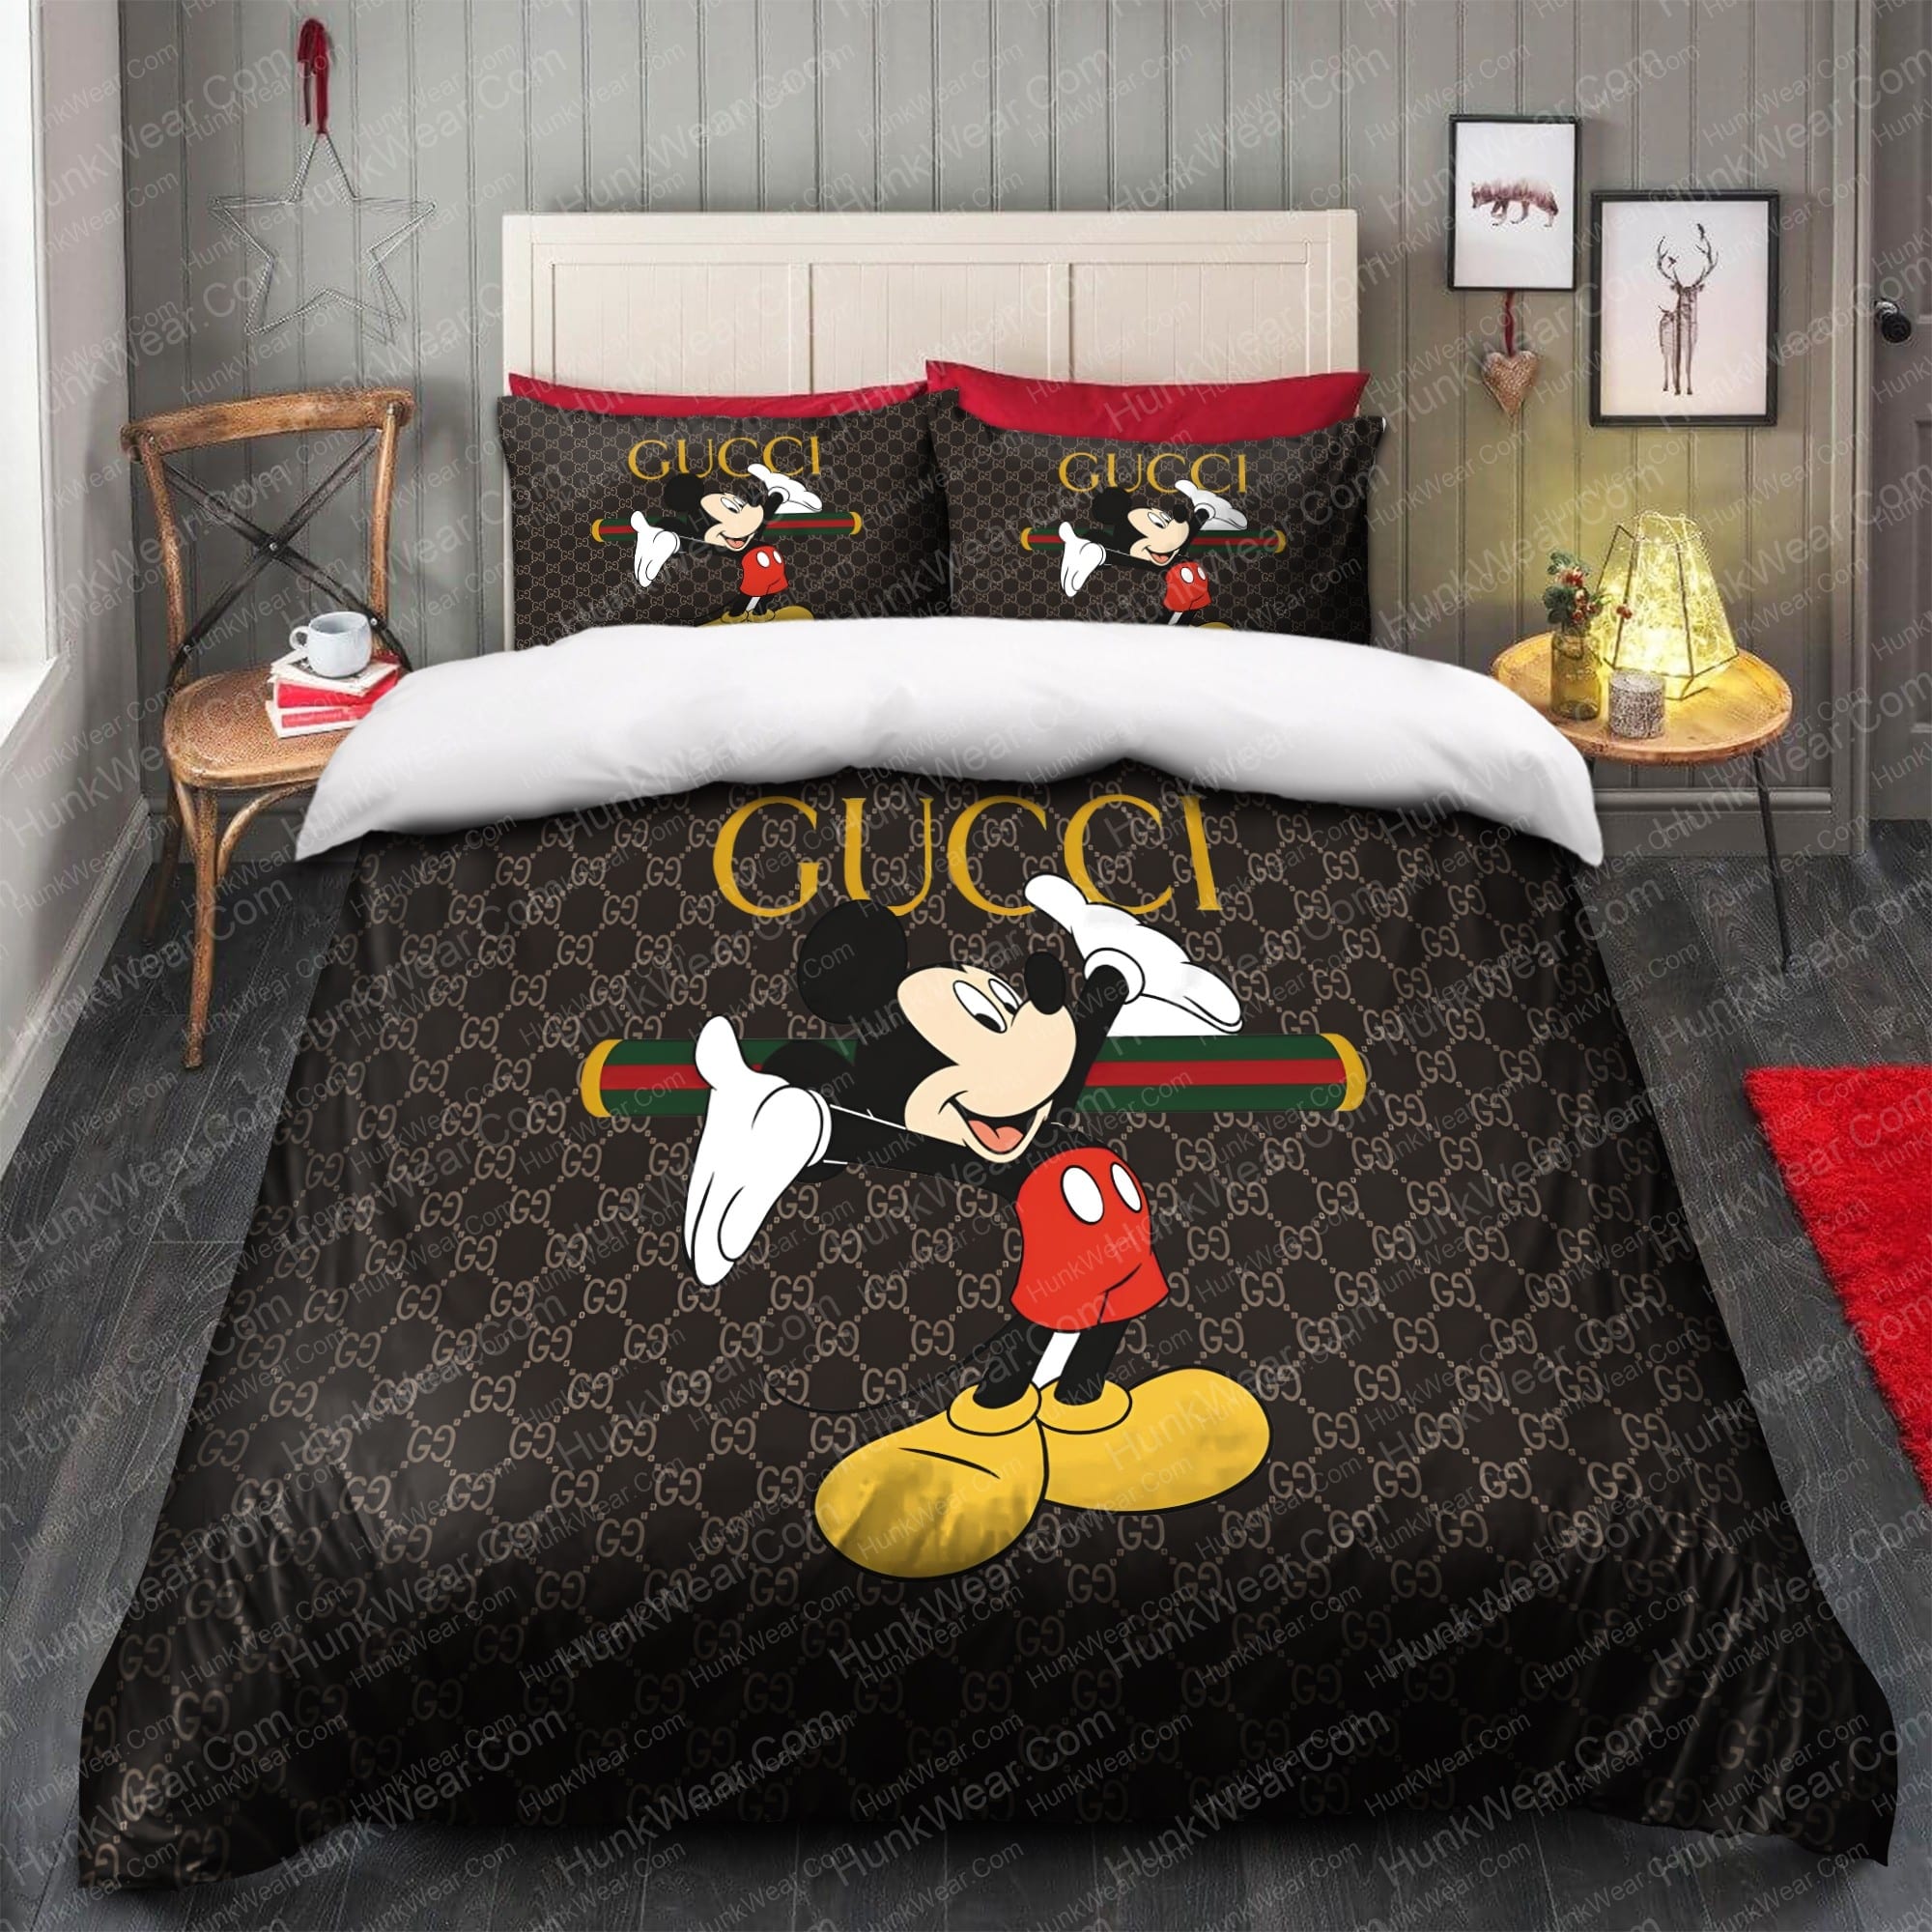 mickey mouse gucci bedding sets 1